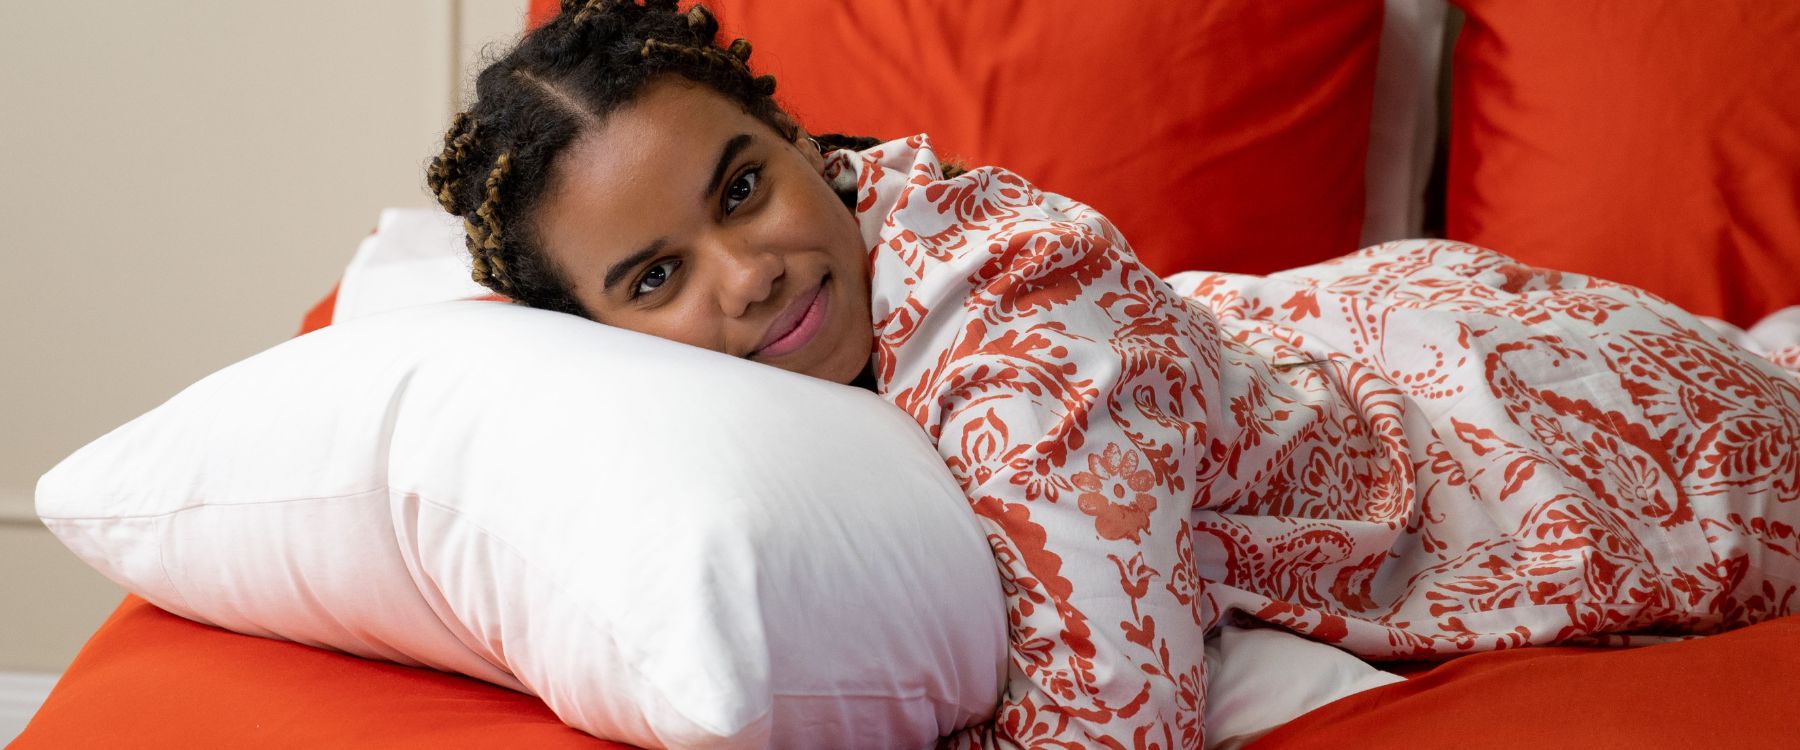 Smart pyjamas could detect why you're not sleeping well